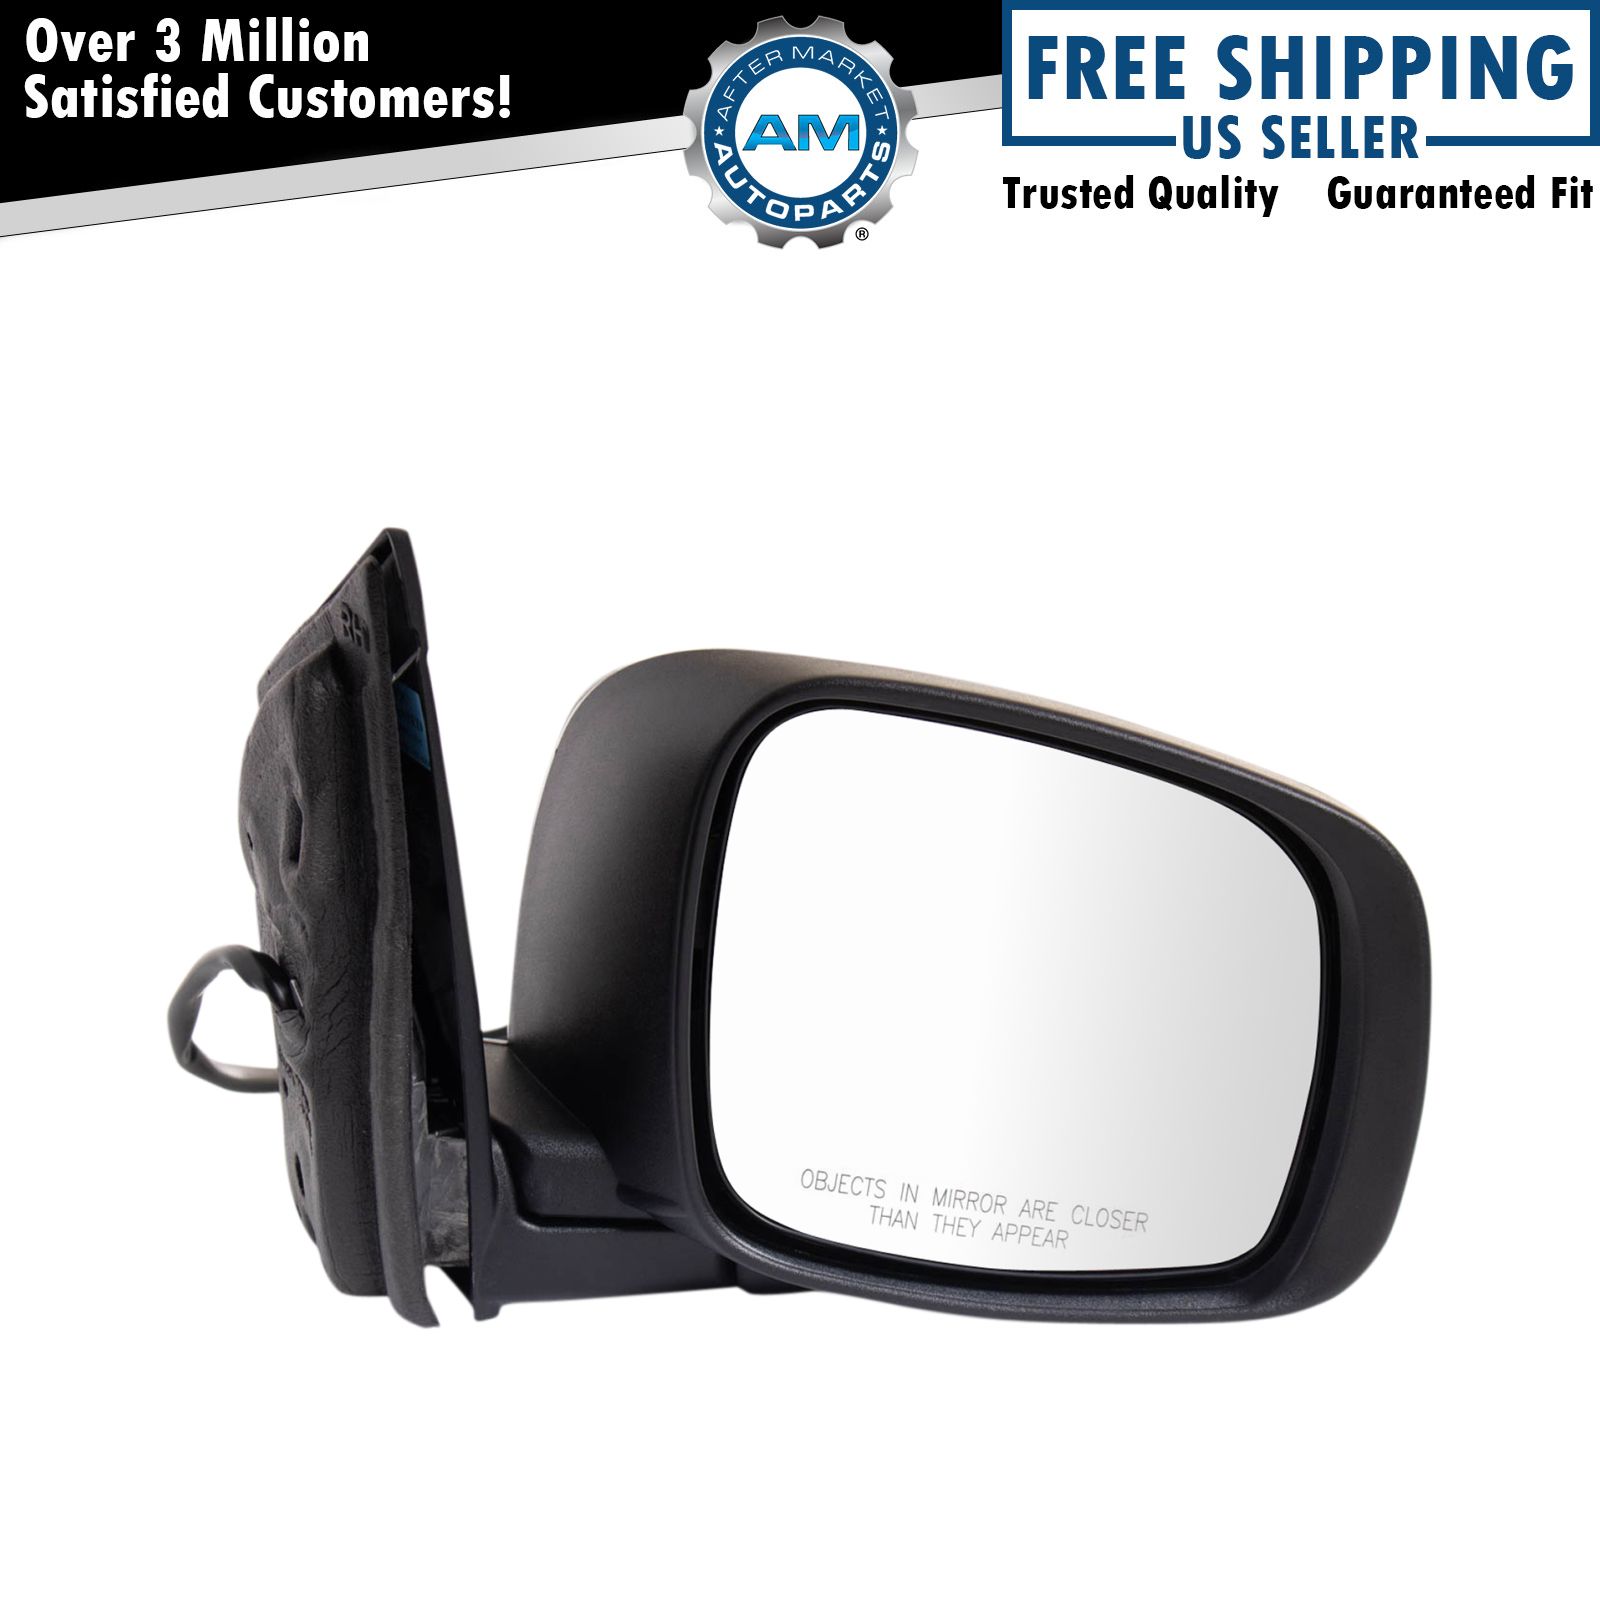 Right Mirror Fits 2008-2016 Chrysler Town & Country 08-10 Dodge Grand Caravan